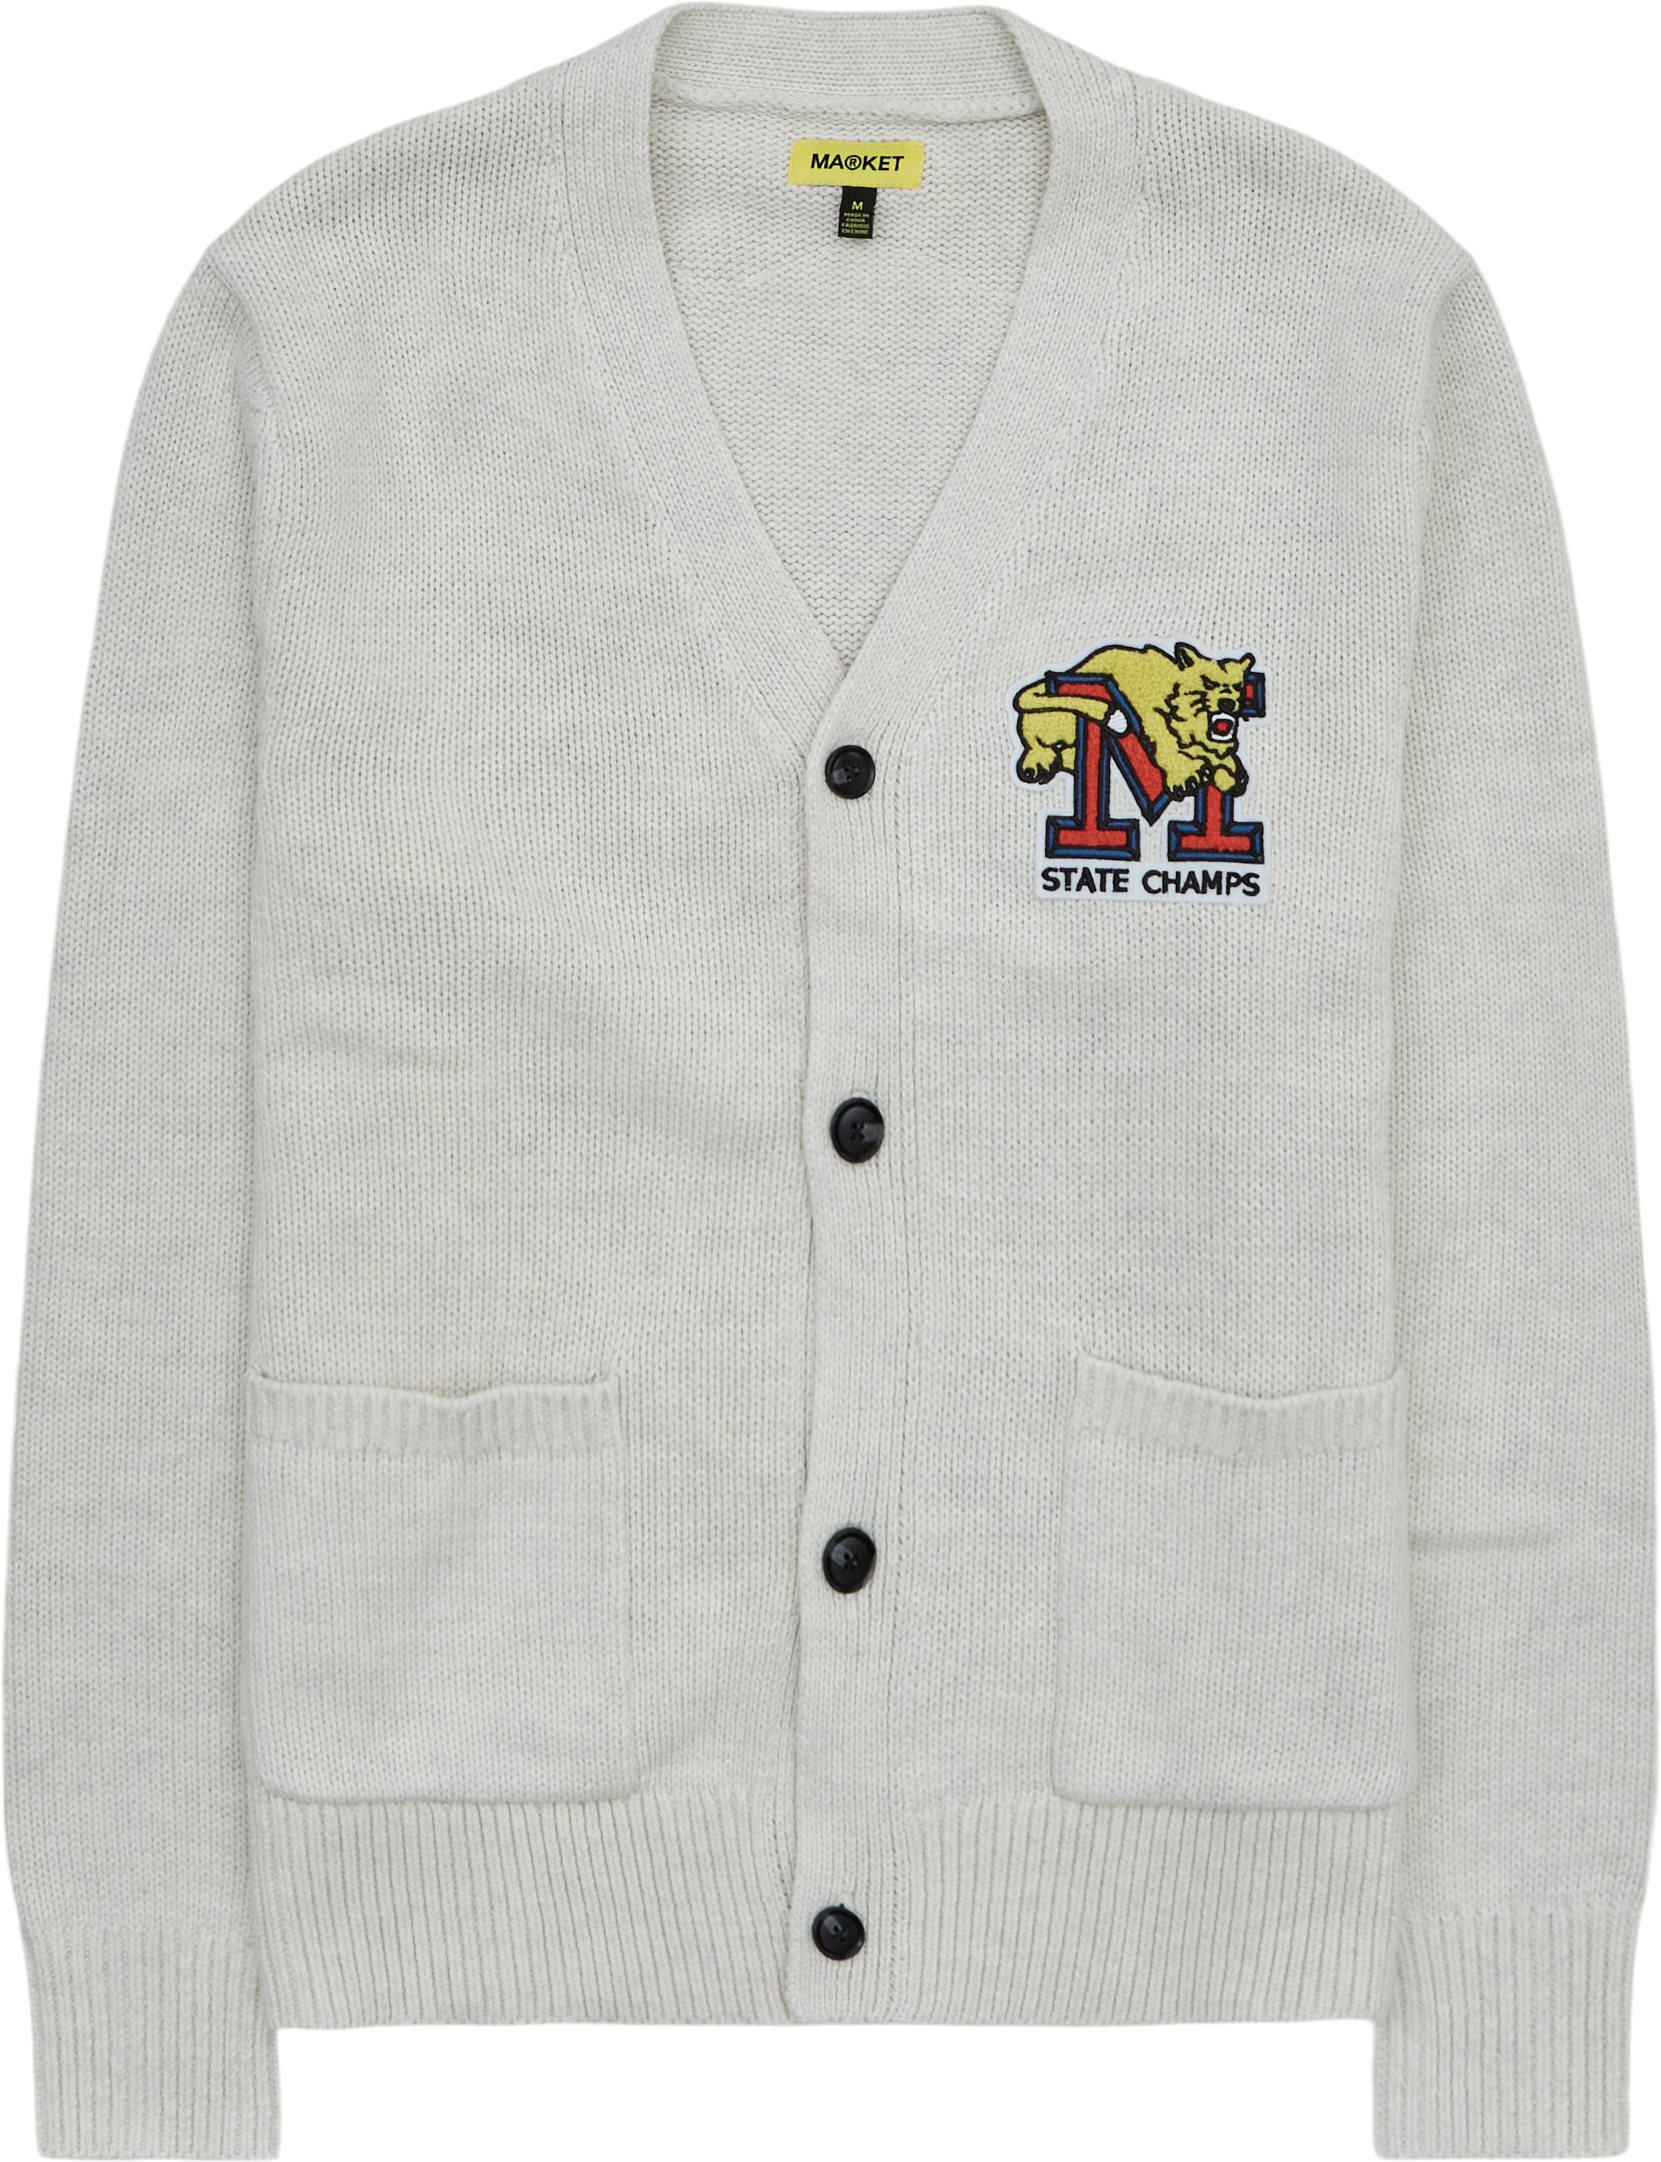 Market Knitwear STATE CHAMPS CARDIGAN Sand